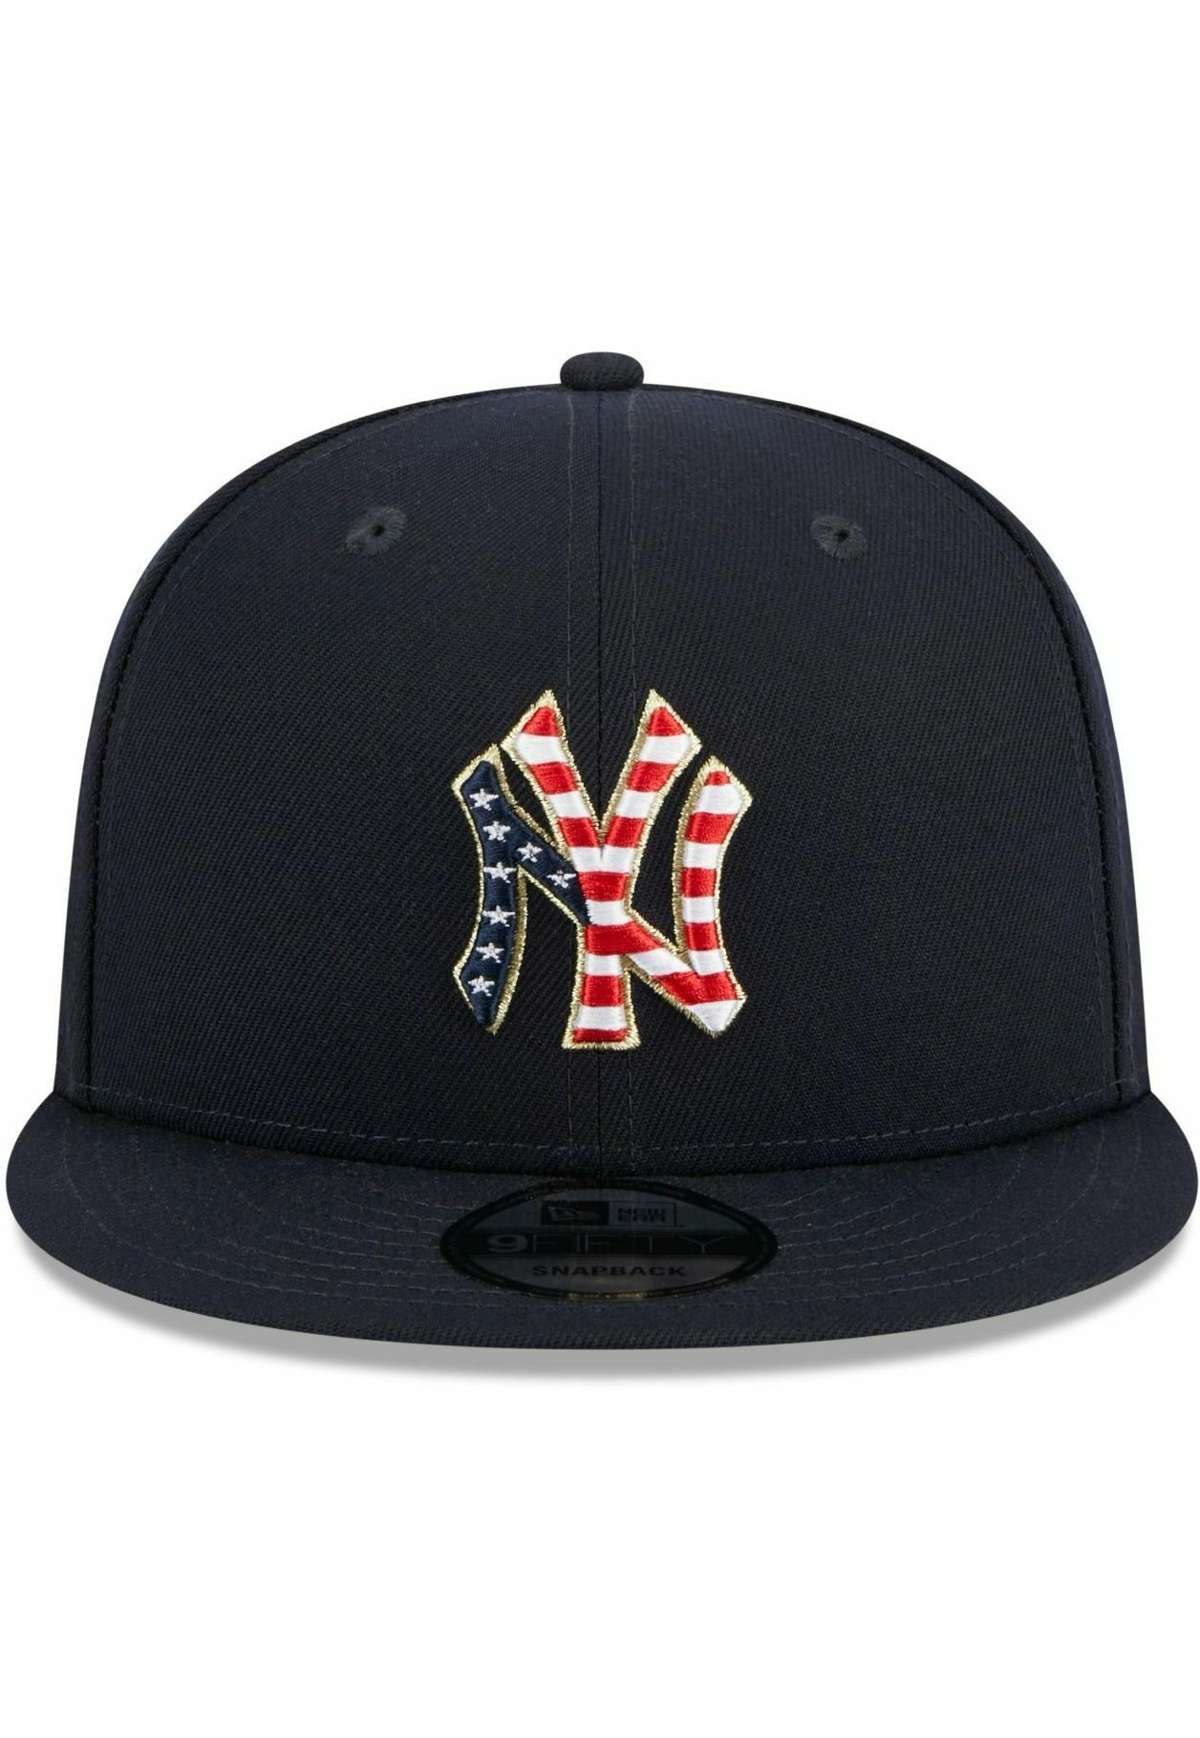 Кепка 9FIFTY 4TH JULY NEW YORK YANKEES